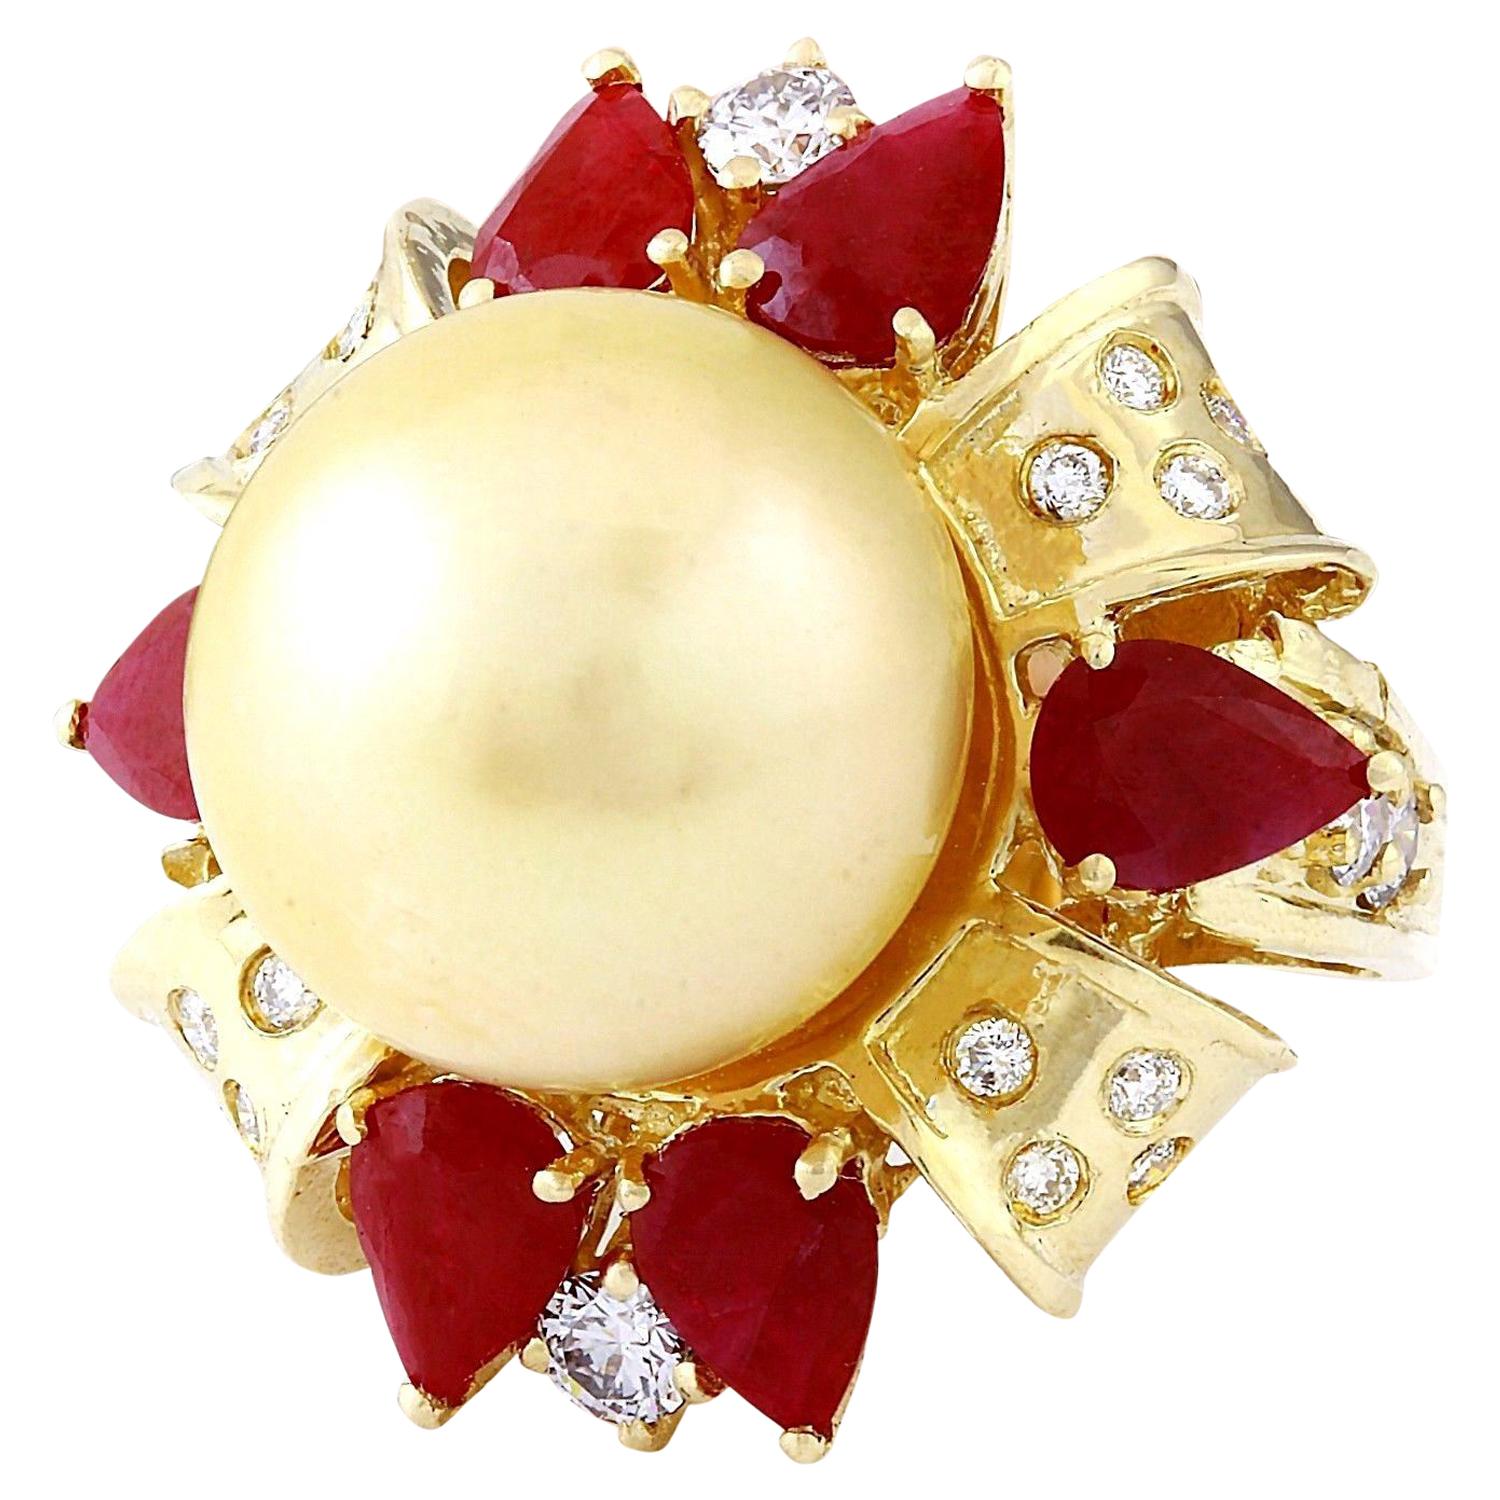 15.15 mm Gold South Sea Pearl, Ruby 14K Solid Yellow Gold Diamond Ring
 Item Type: Ring
 Item Style: Cocktail
 Material: 14K Yellow Gold
 Mainstone: South Sea Pearl
 Stone Color: Gold
 Stone Shape: Round
 Stone Quantity: 1
 Stone Dimensions: